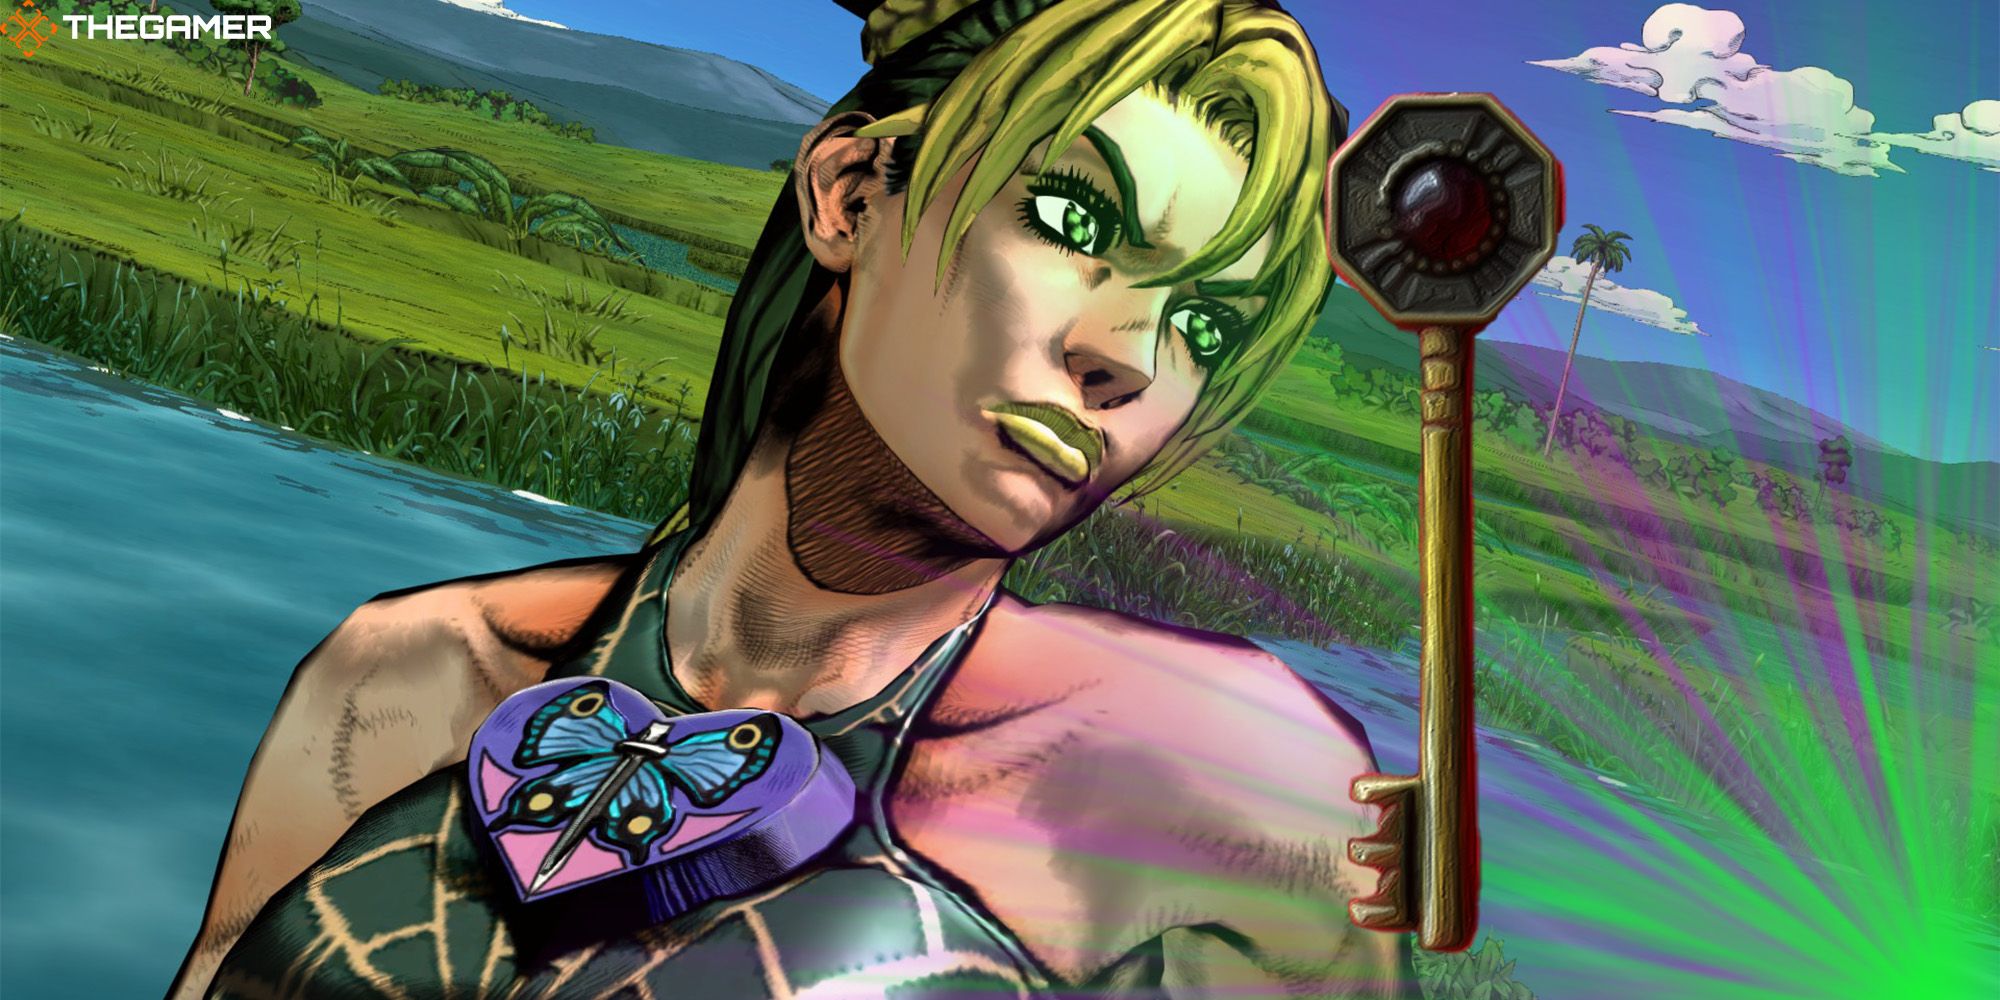 Jolyne Cujoh stands in the Everglades, looking at a key enshrouded in purple and green light. Custom image for JoJo's Bizarre Adventure ASBR.